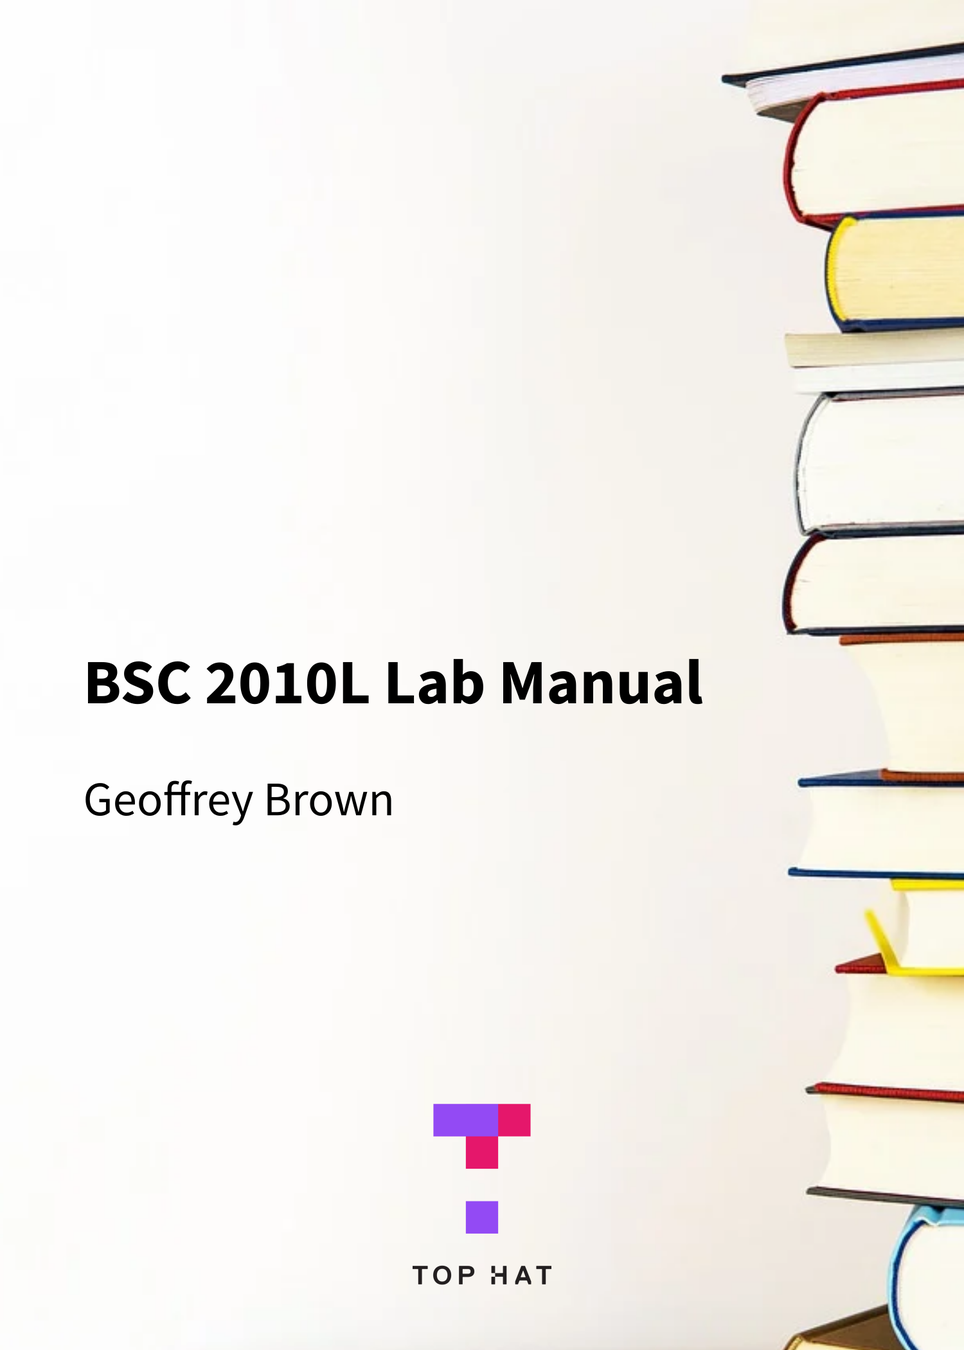 BSC 2010L Lab Manual cover photo